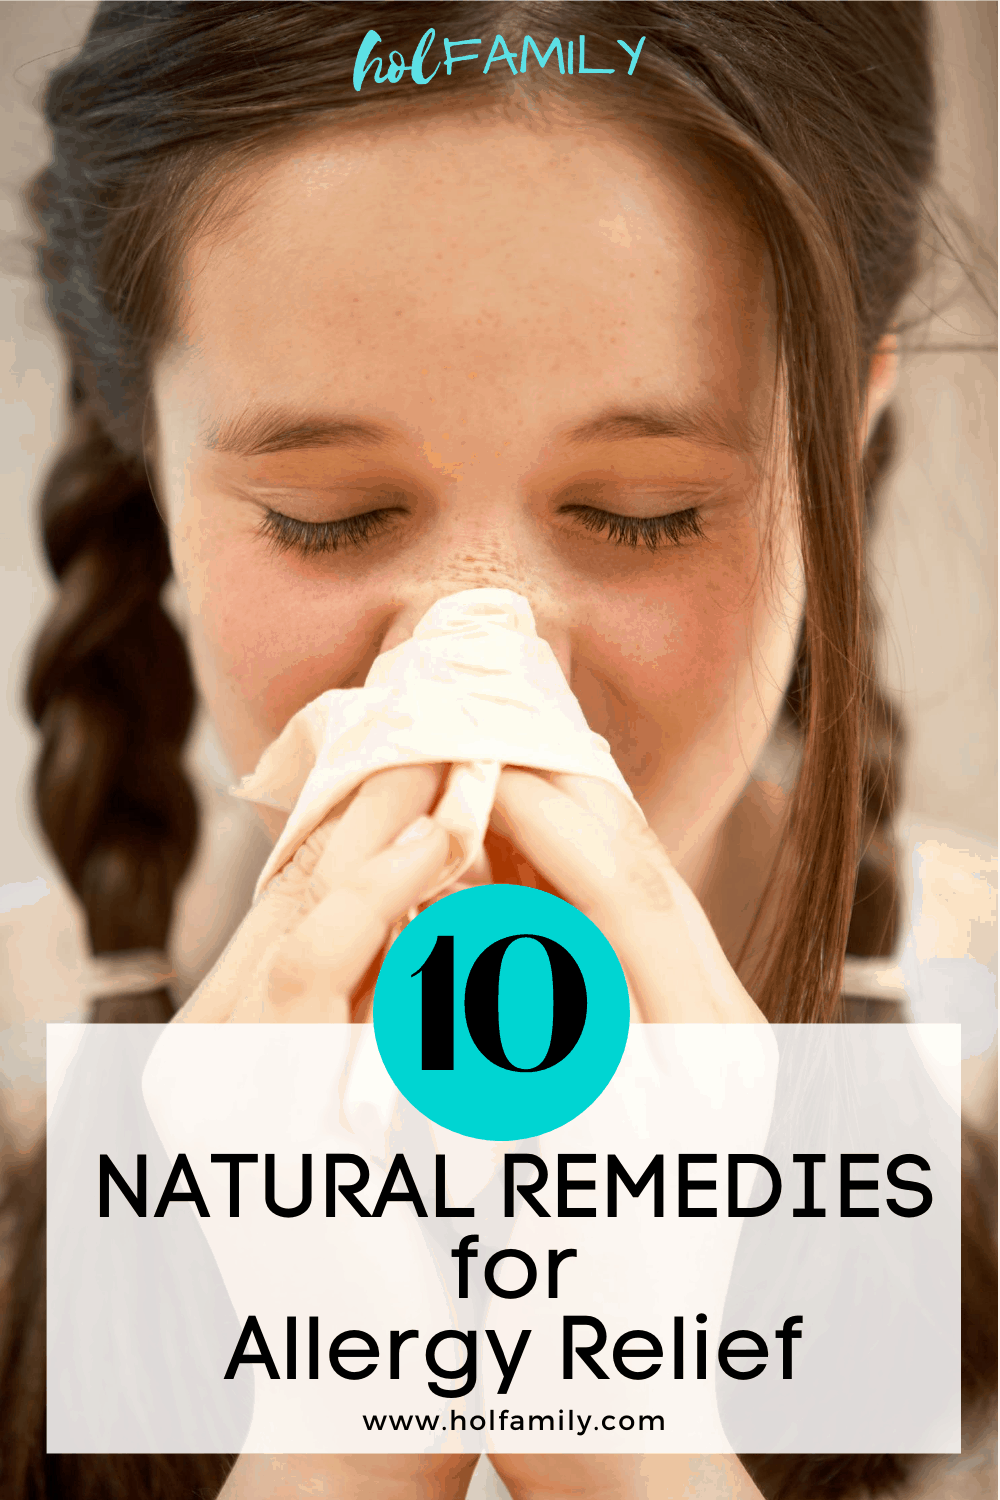 Natural Remedies for Allergy Relief